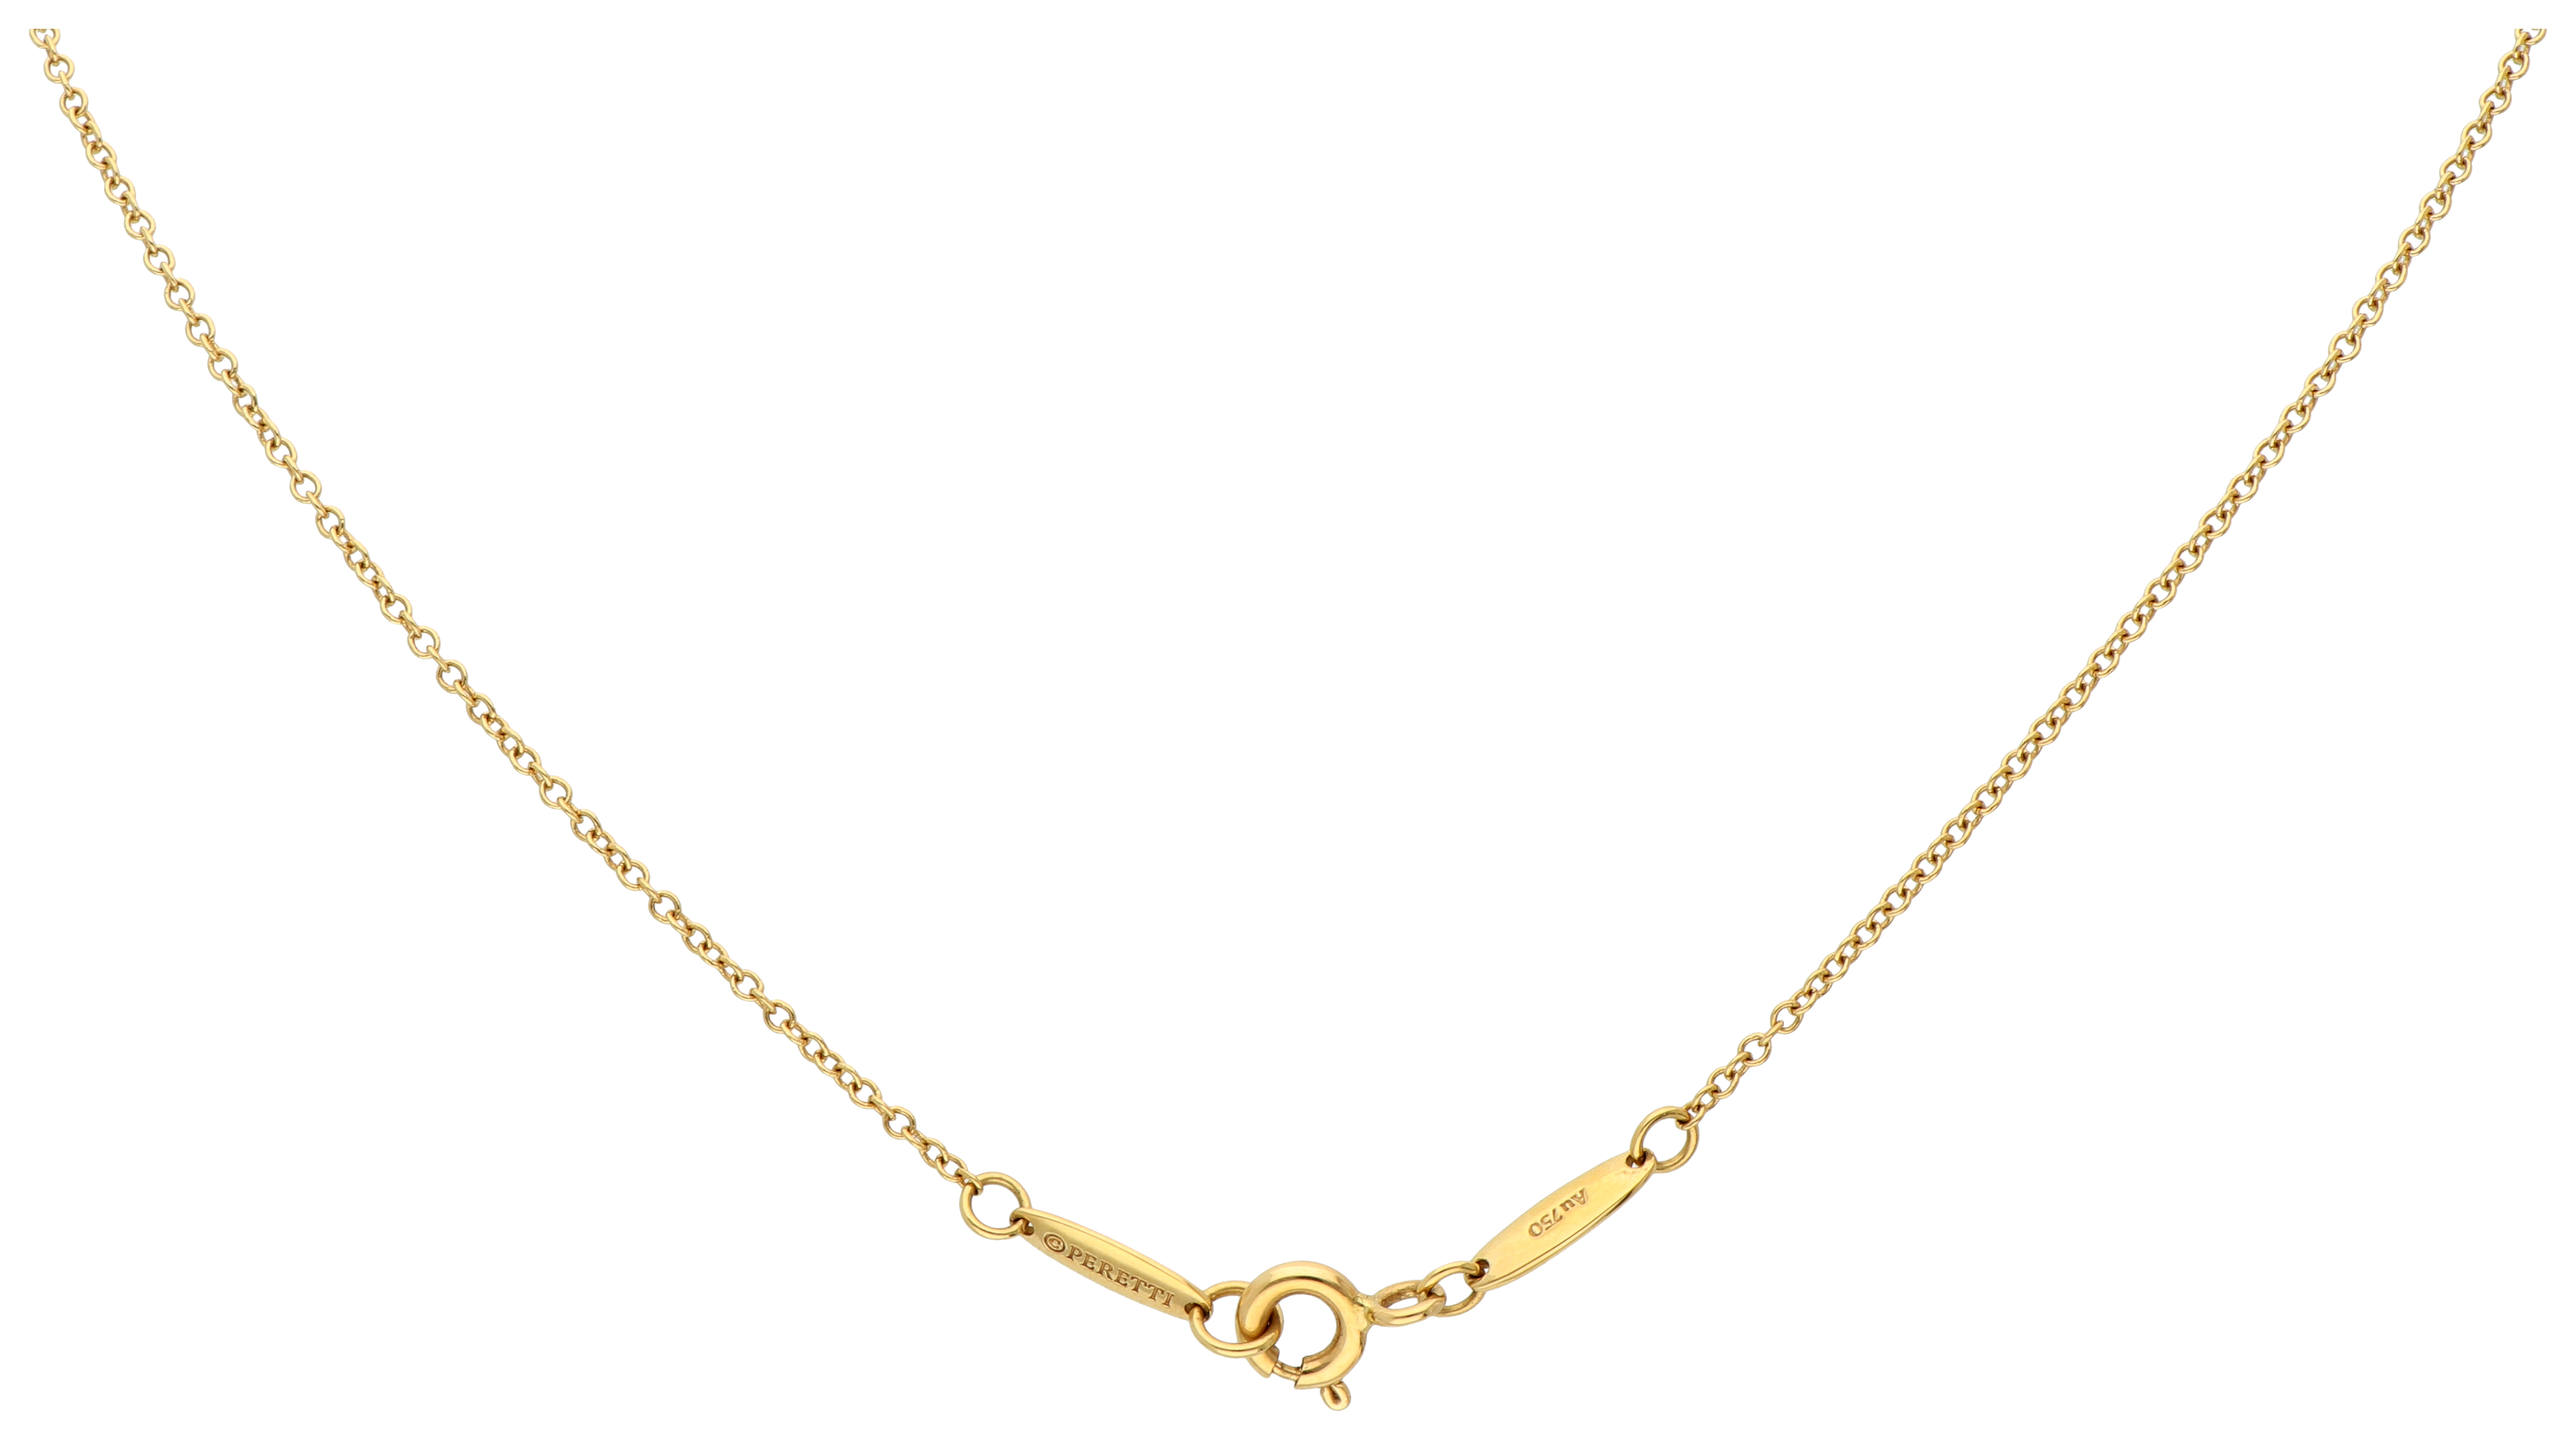 No Reserve - Elsa Peretti for Tiffany & Co 18K yellow gold "Color by the Yard" necklace set with eme - Image 2 of 5